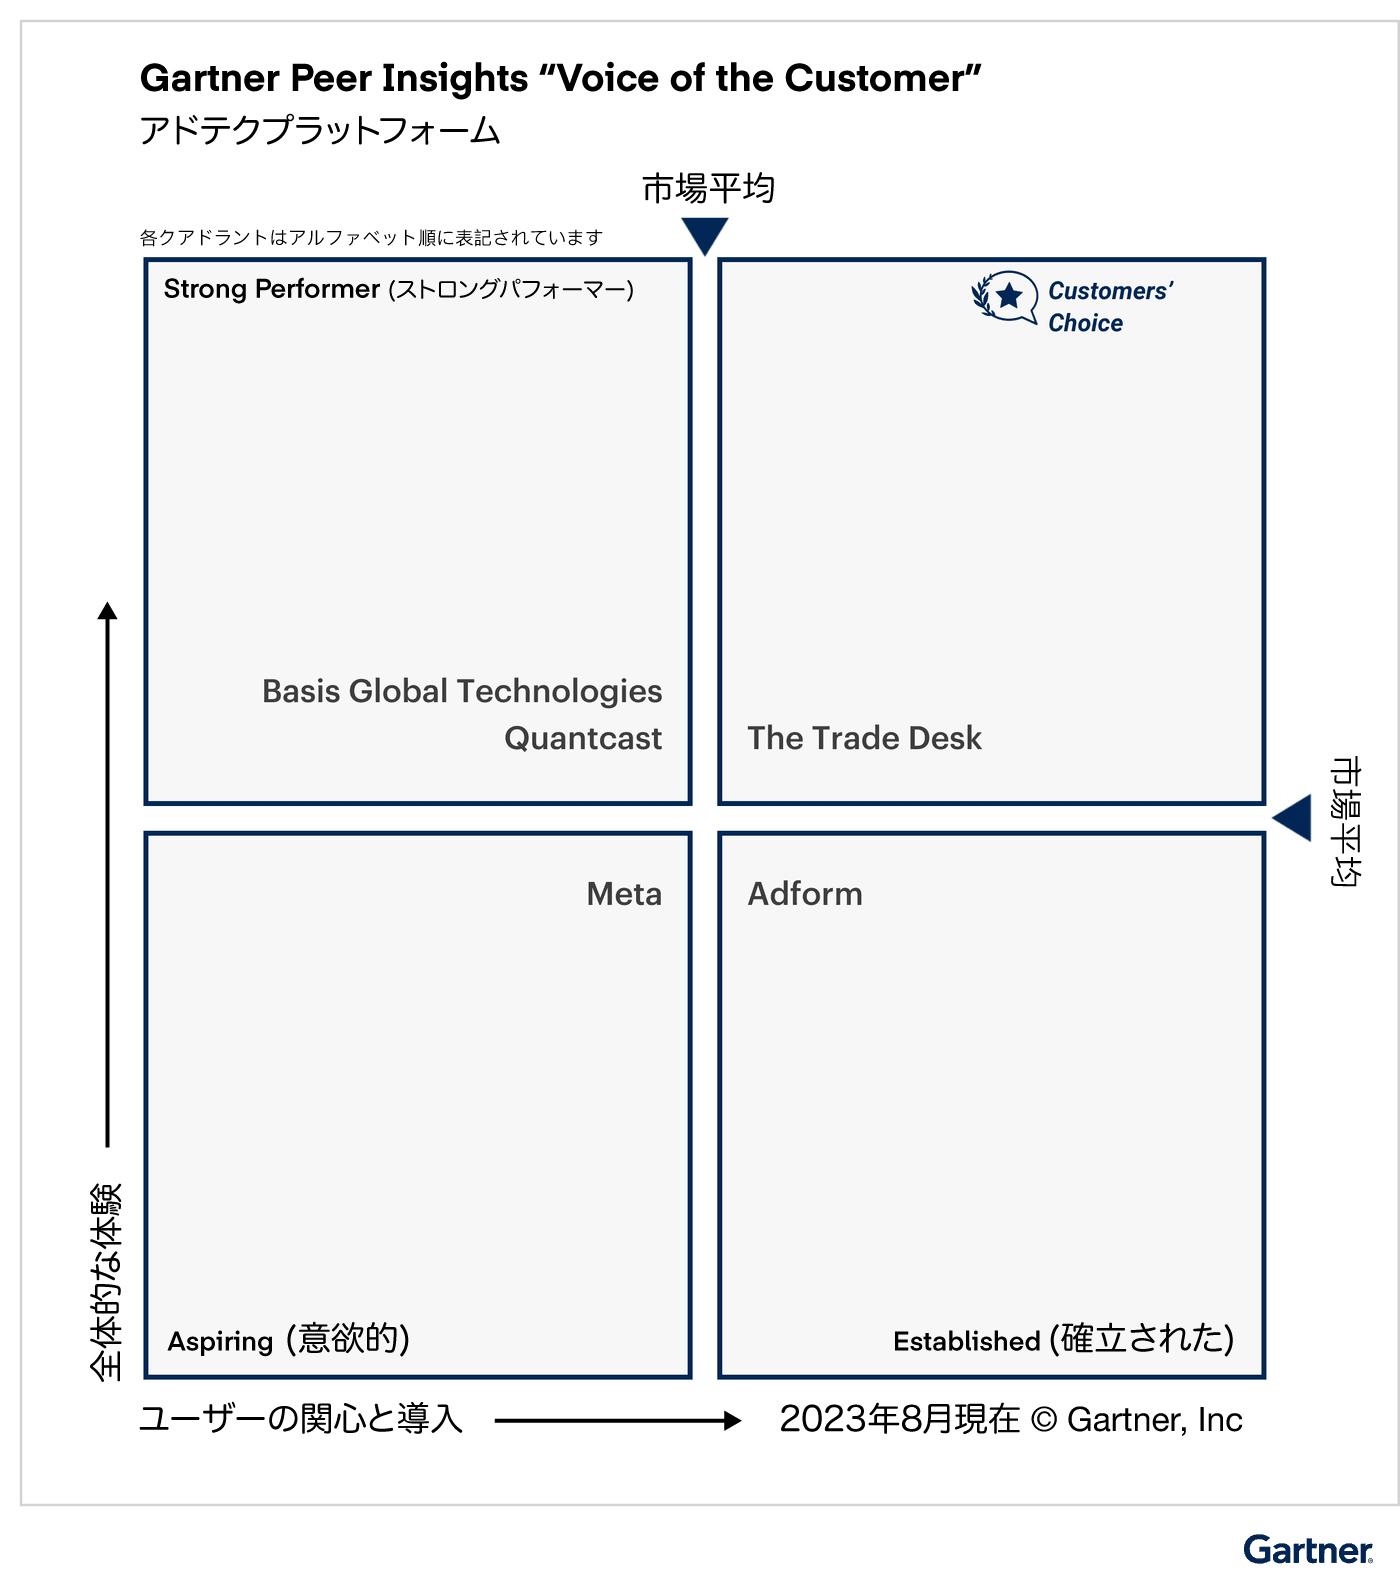 Infographic displaying The Trade Desk being voted a 2023 Customers' Choice in Gartner